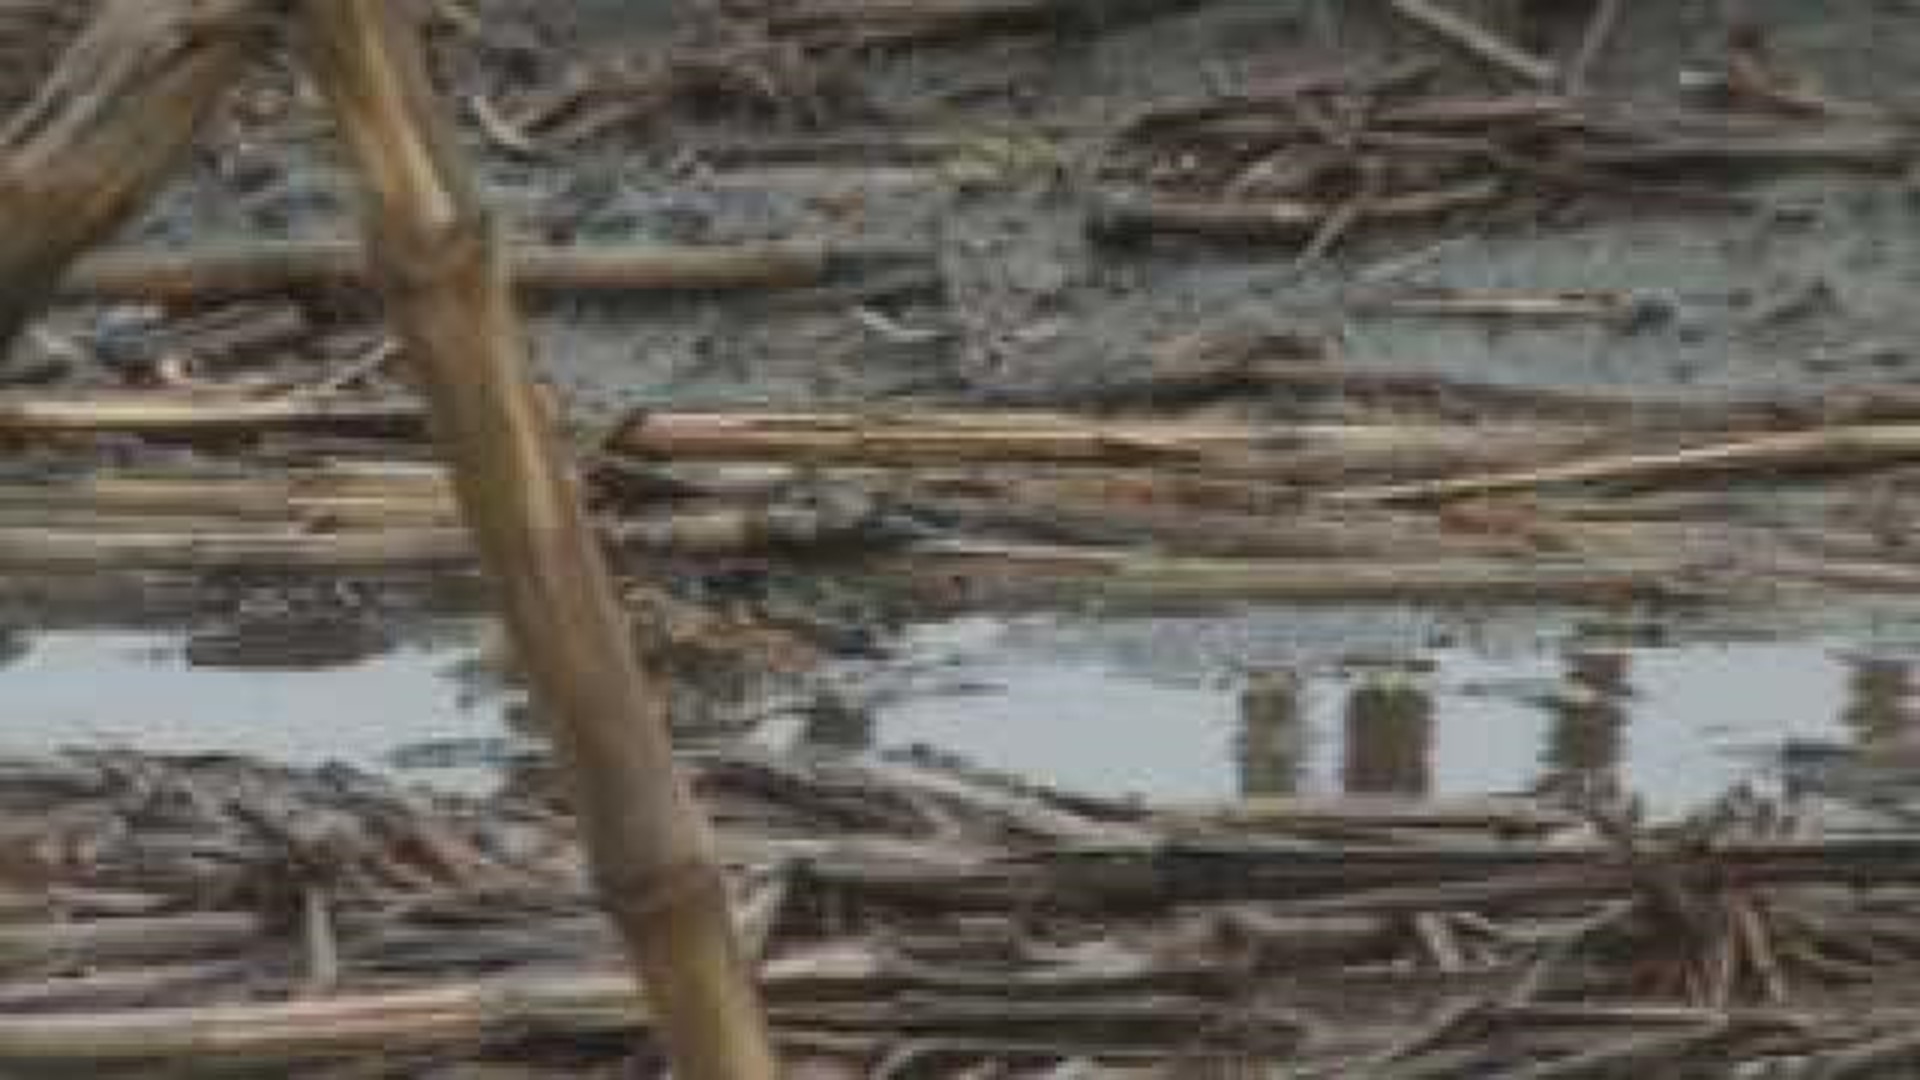 Drought officially ends in parts of Knox County